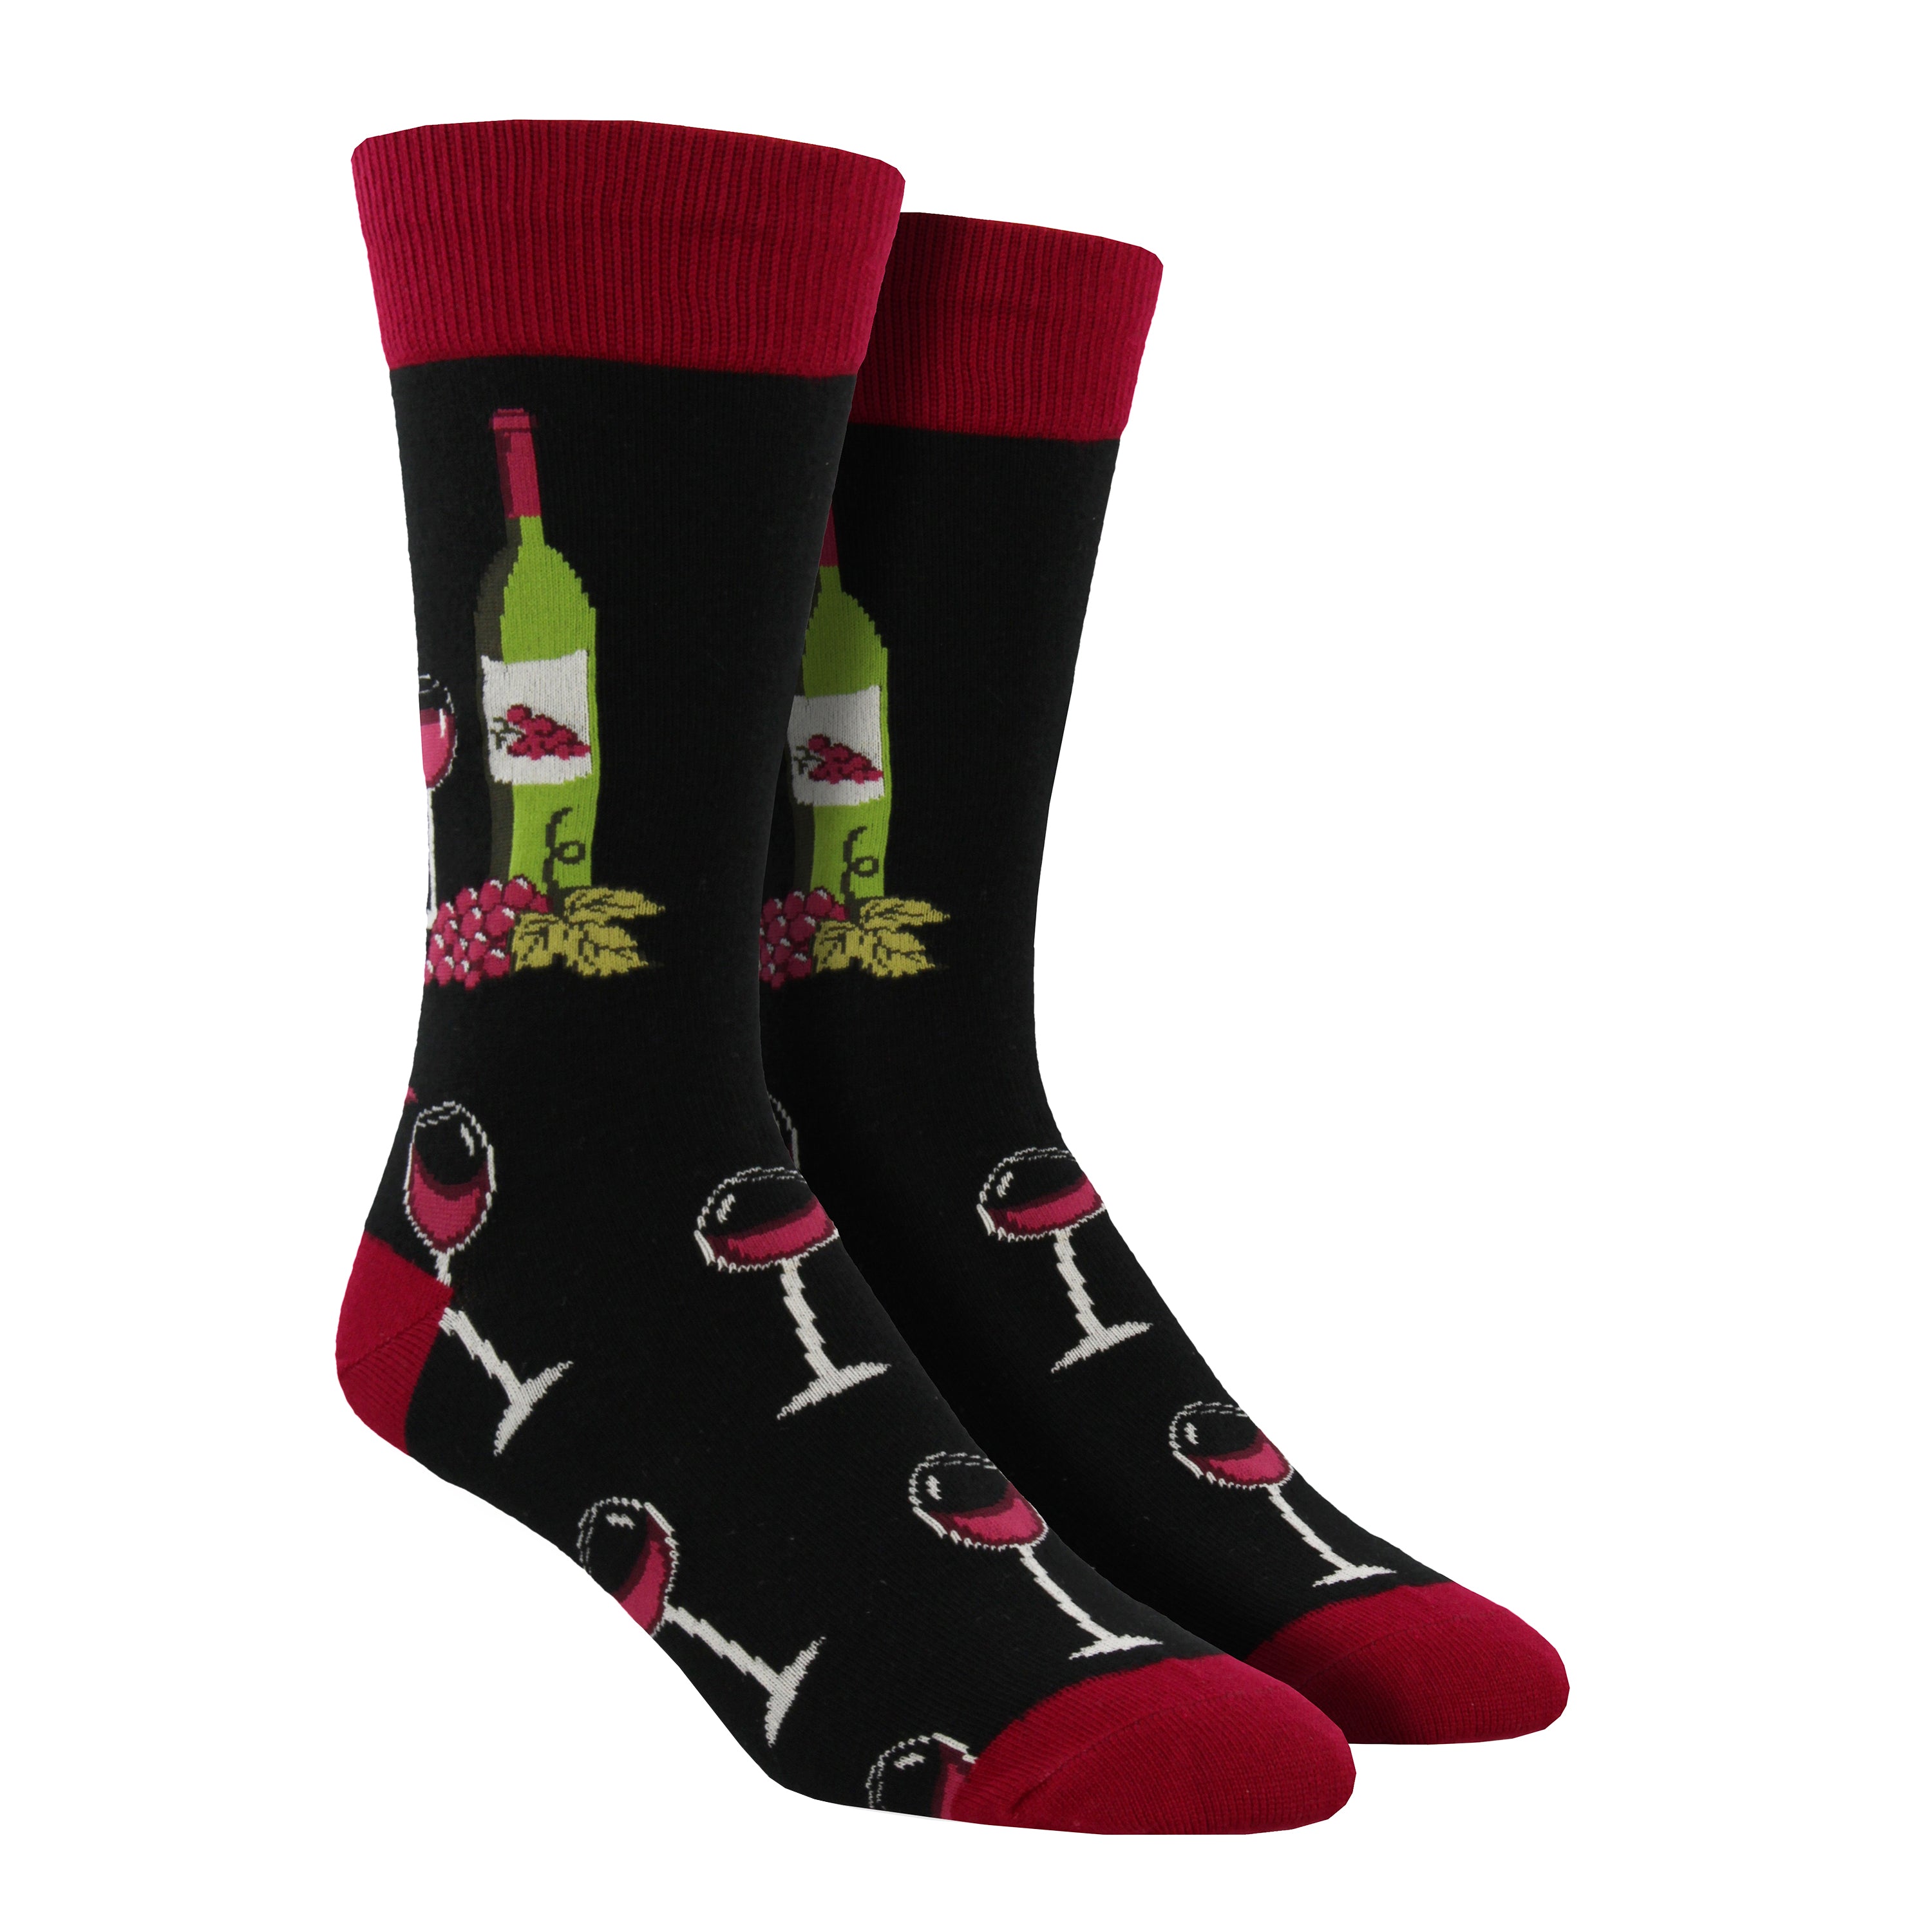 Shown on leg forms, a pair of Socksmith men's cotton crew sock in black with a dark red cuff, heel, and toe. On the leg of the socks is a green wine bottle, a glass of red wine and some grapes. The full wine glasses continue down the foot of the sock